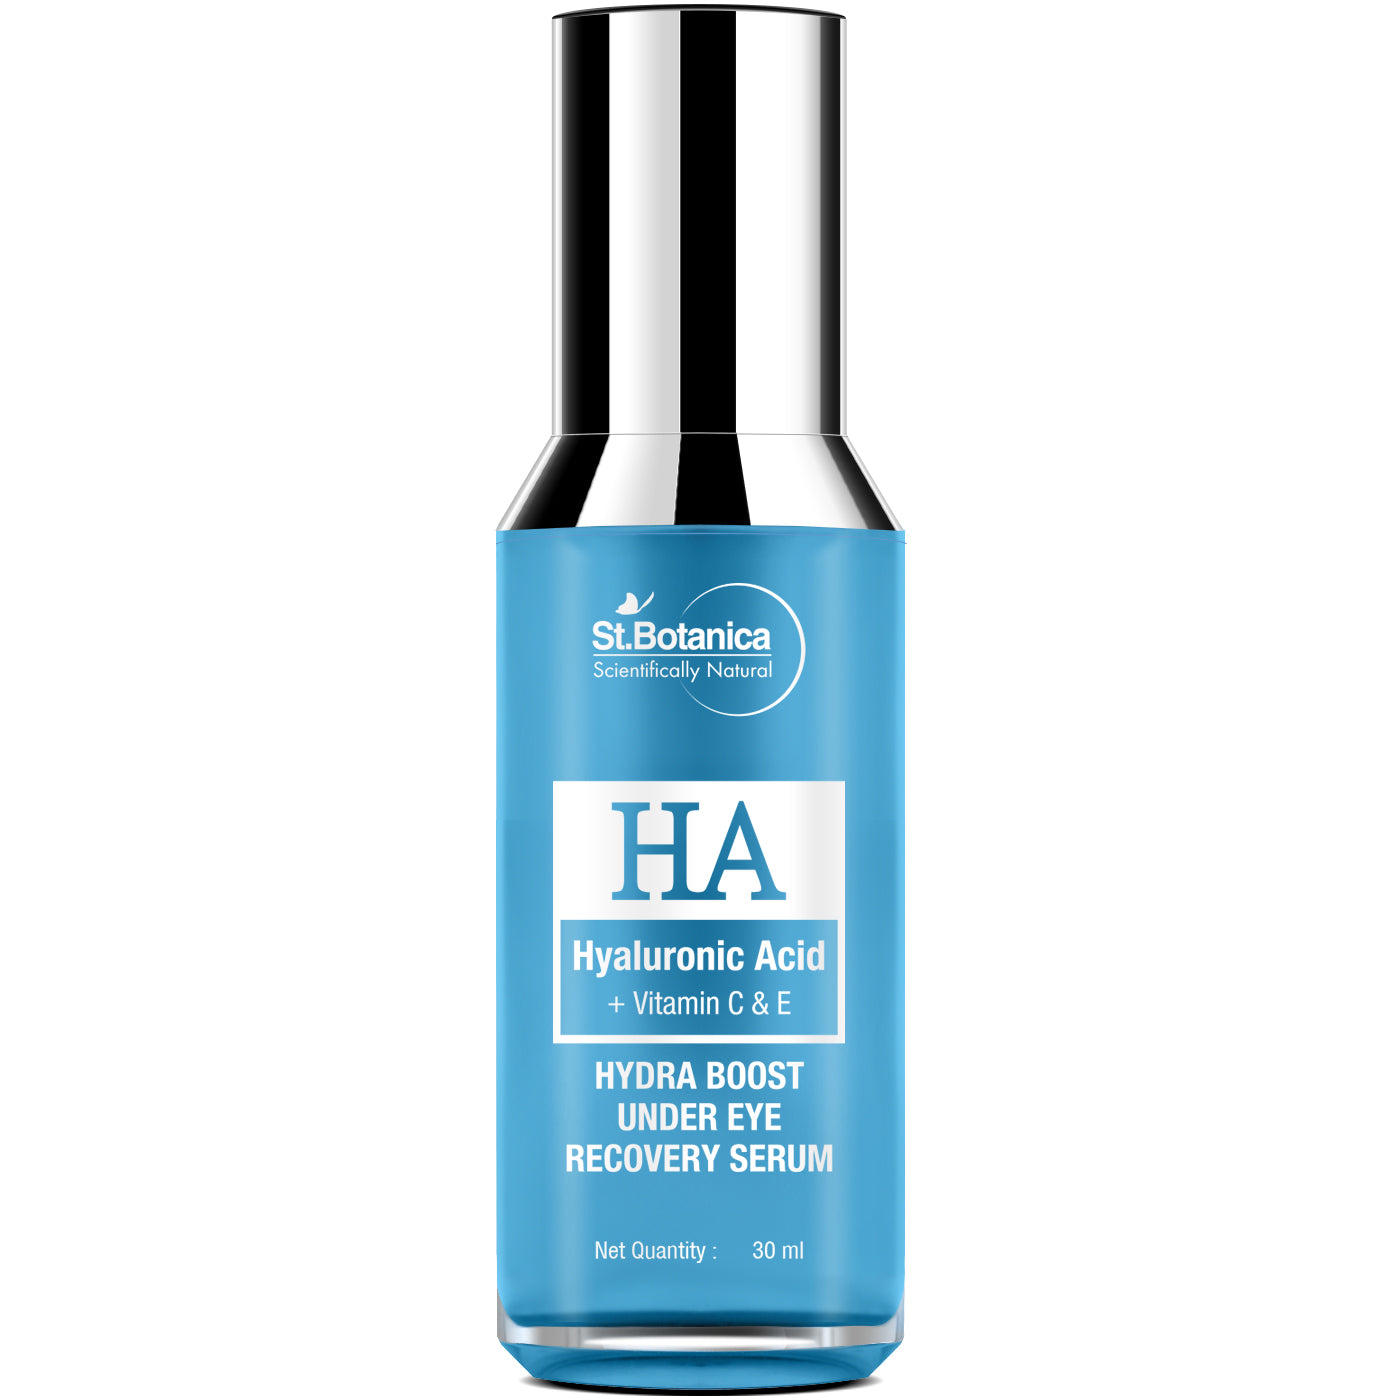 St.Botanica Hyaluronic Acid Hydra Boost Under Eye Recovery Serum - For Dark Circles, Puffiness & Wrinkle, 30 ml